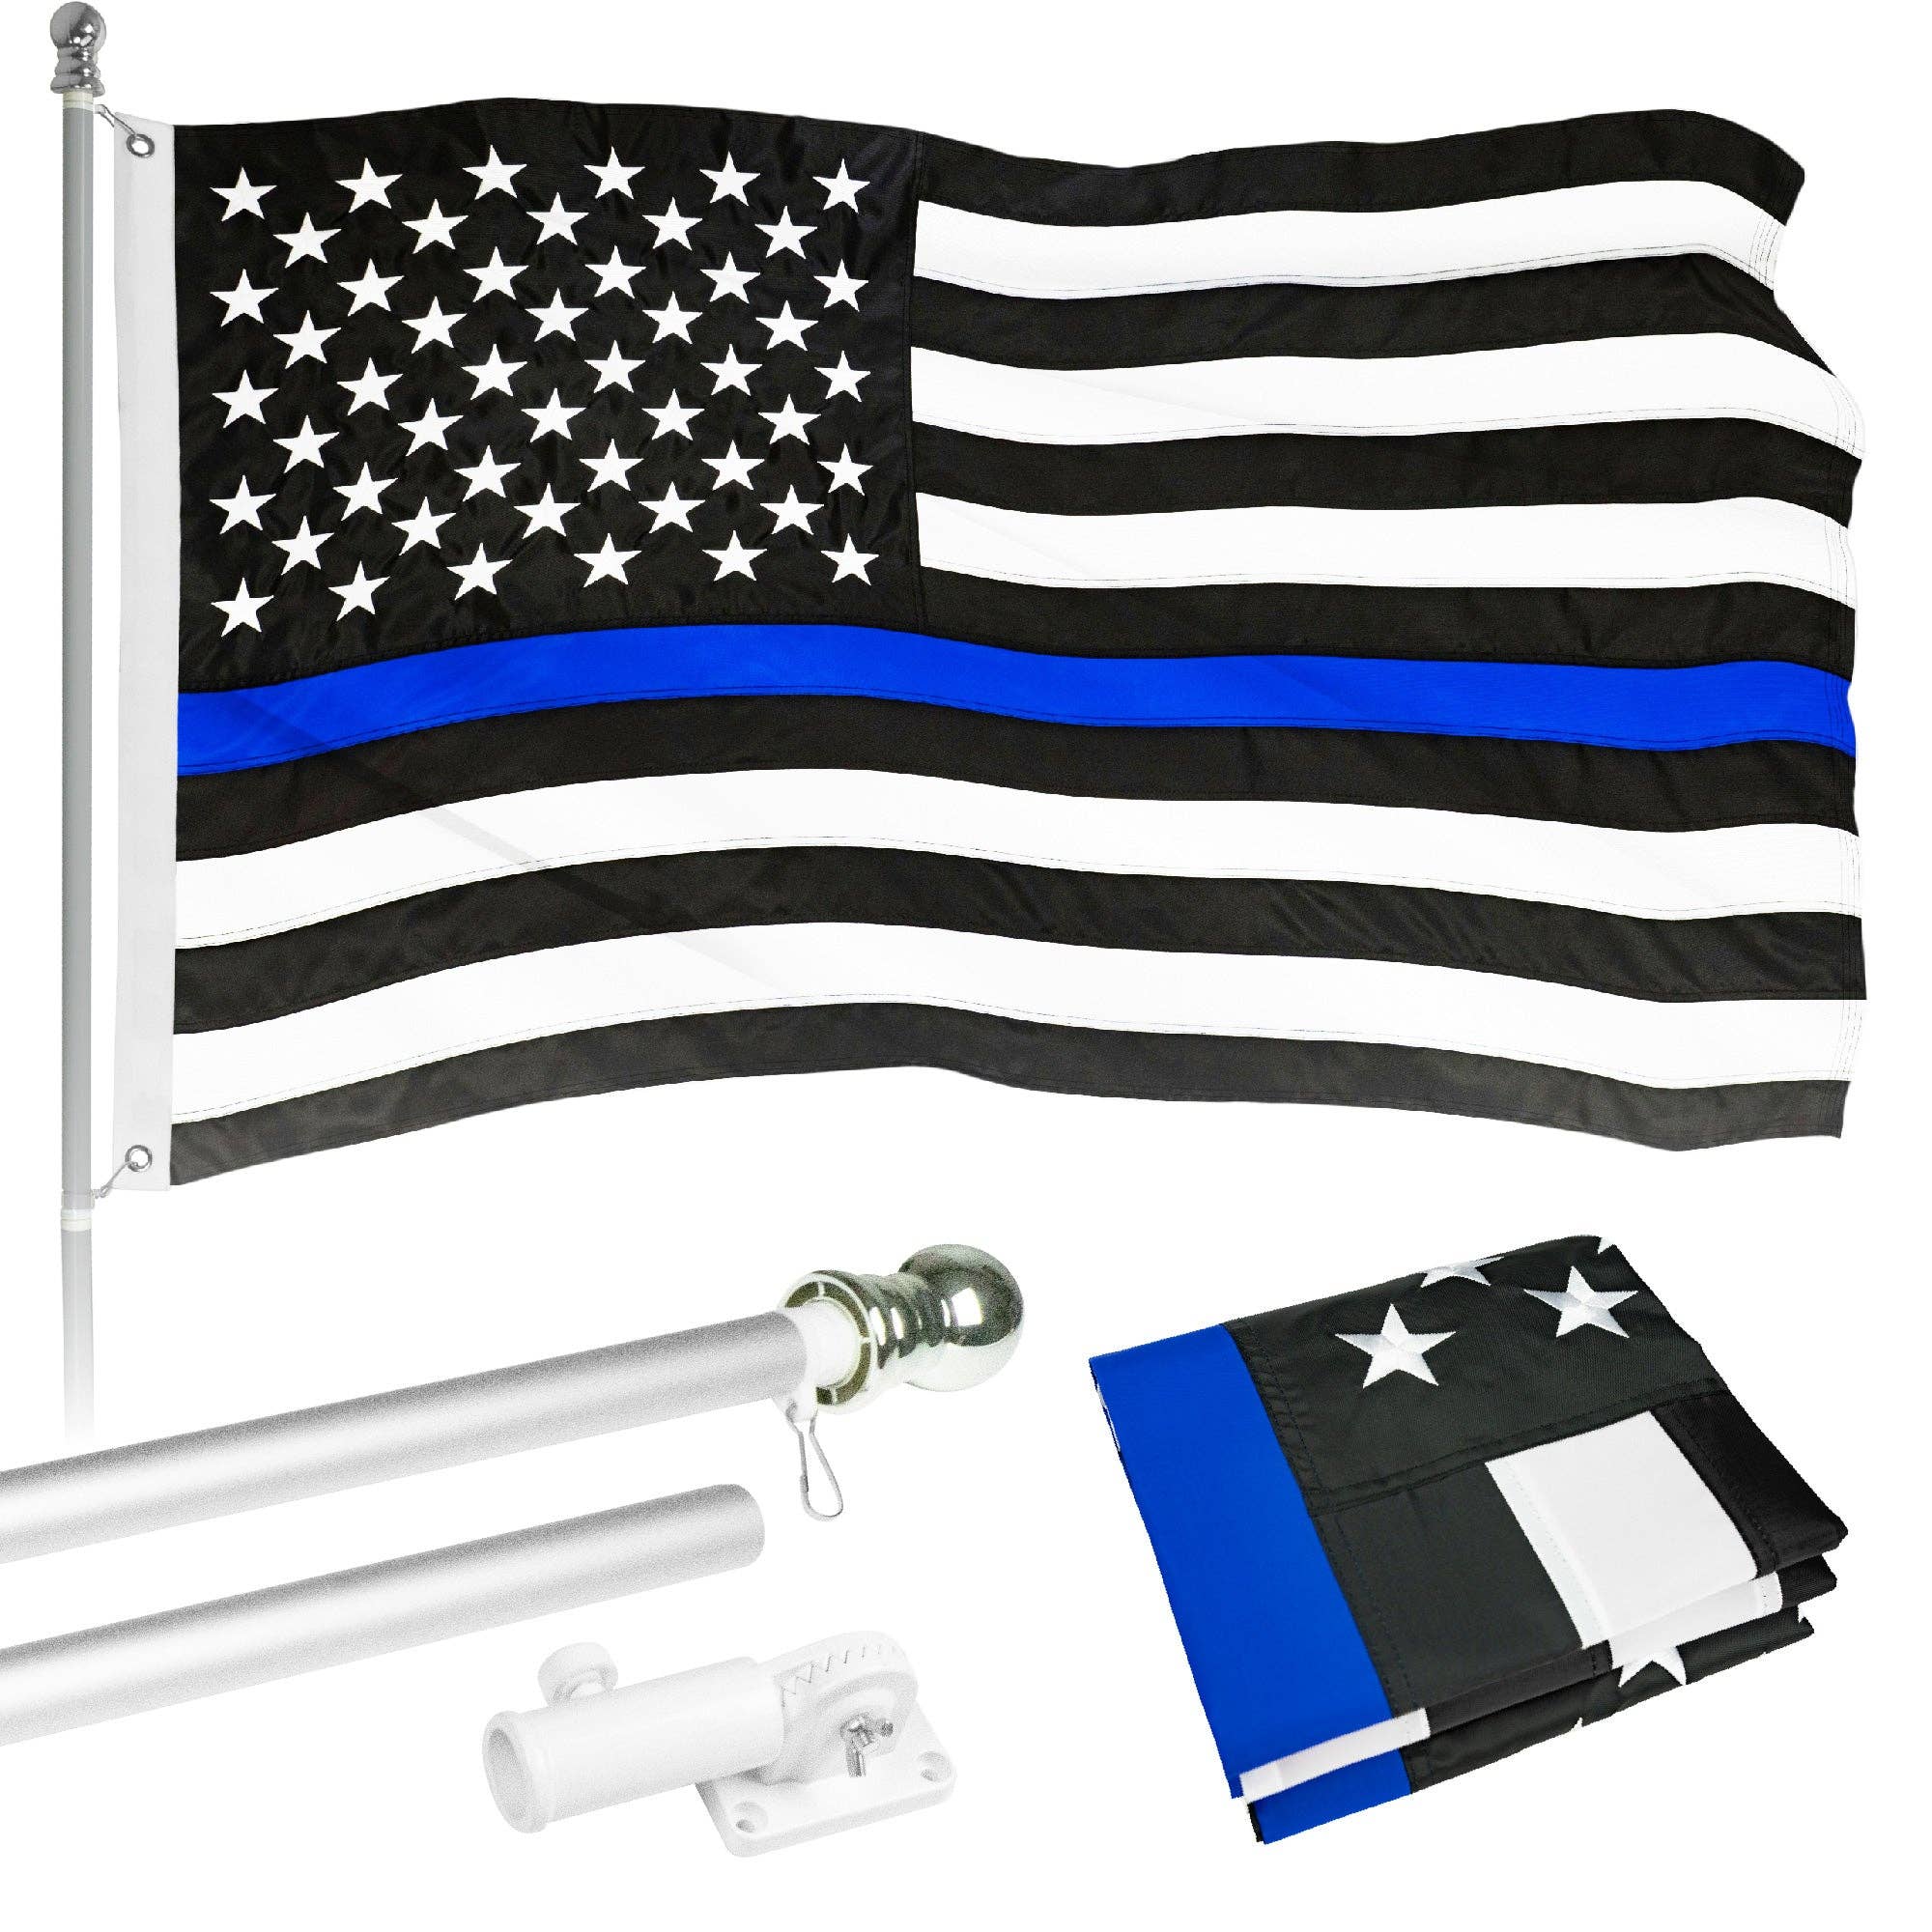 Wholesale Lot of 12 Police Thin Blue Line 4"x6" Desk Table Flag 